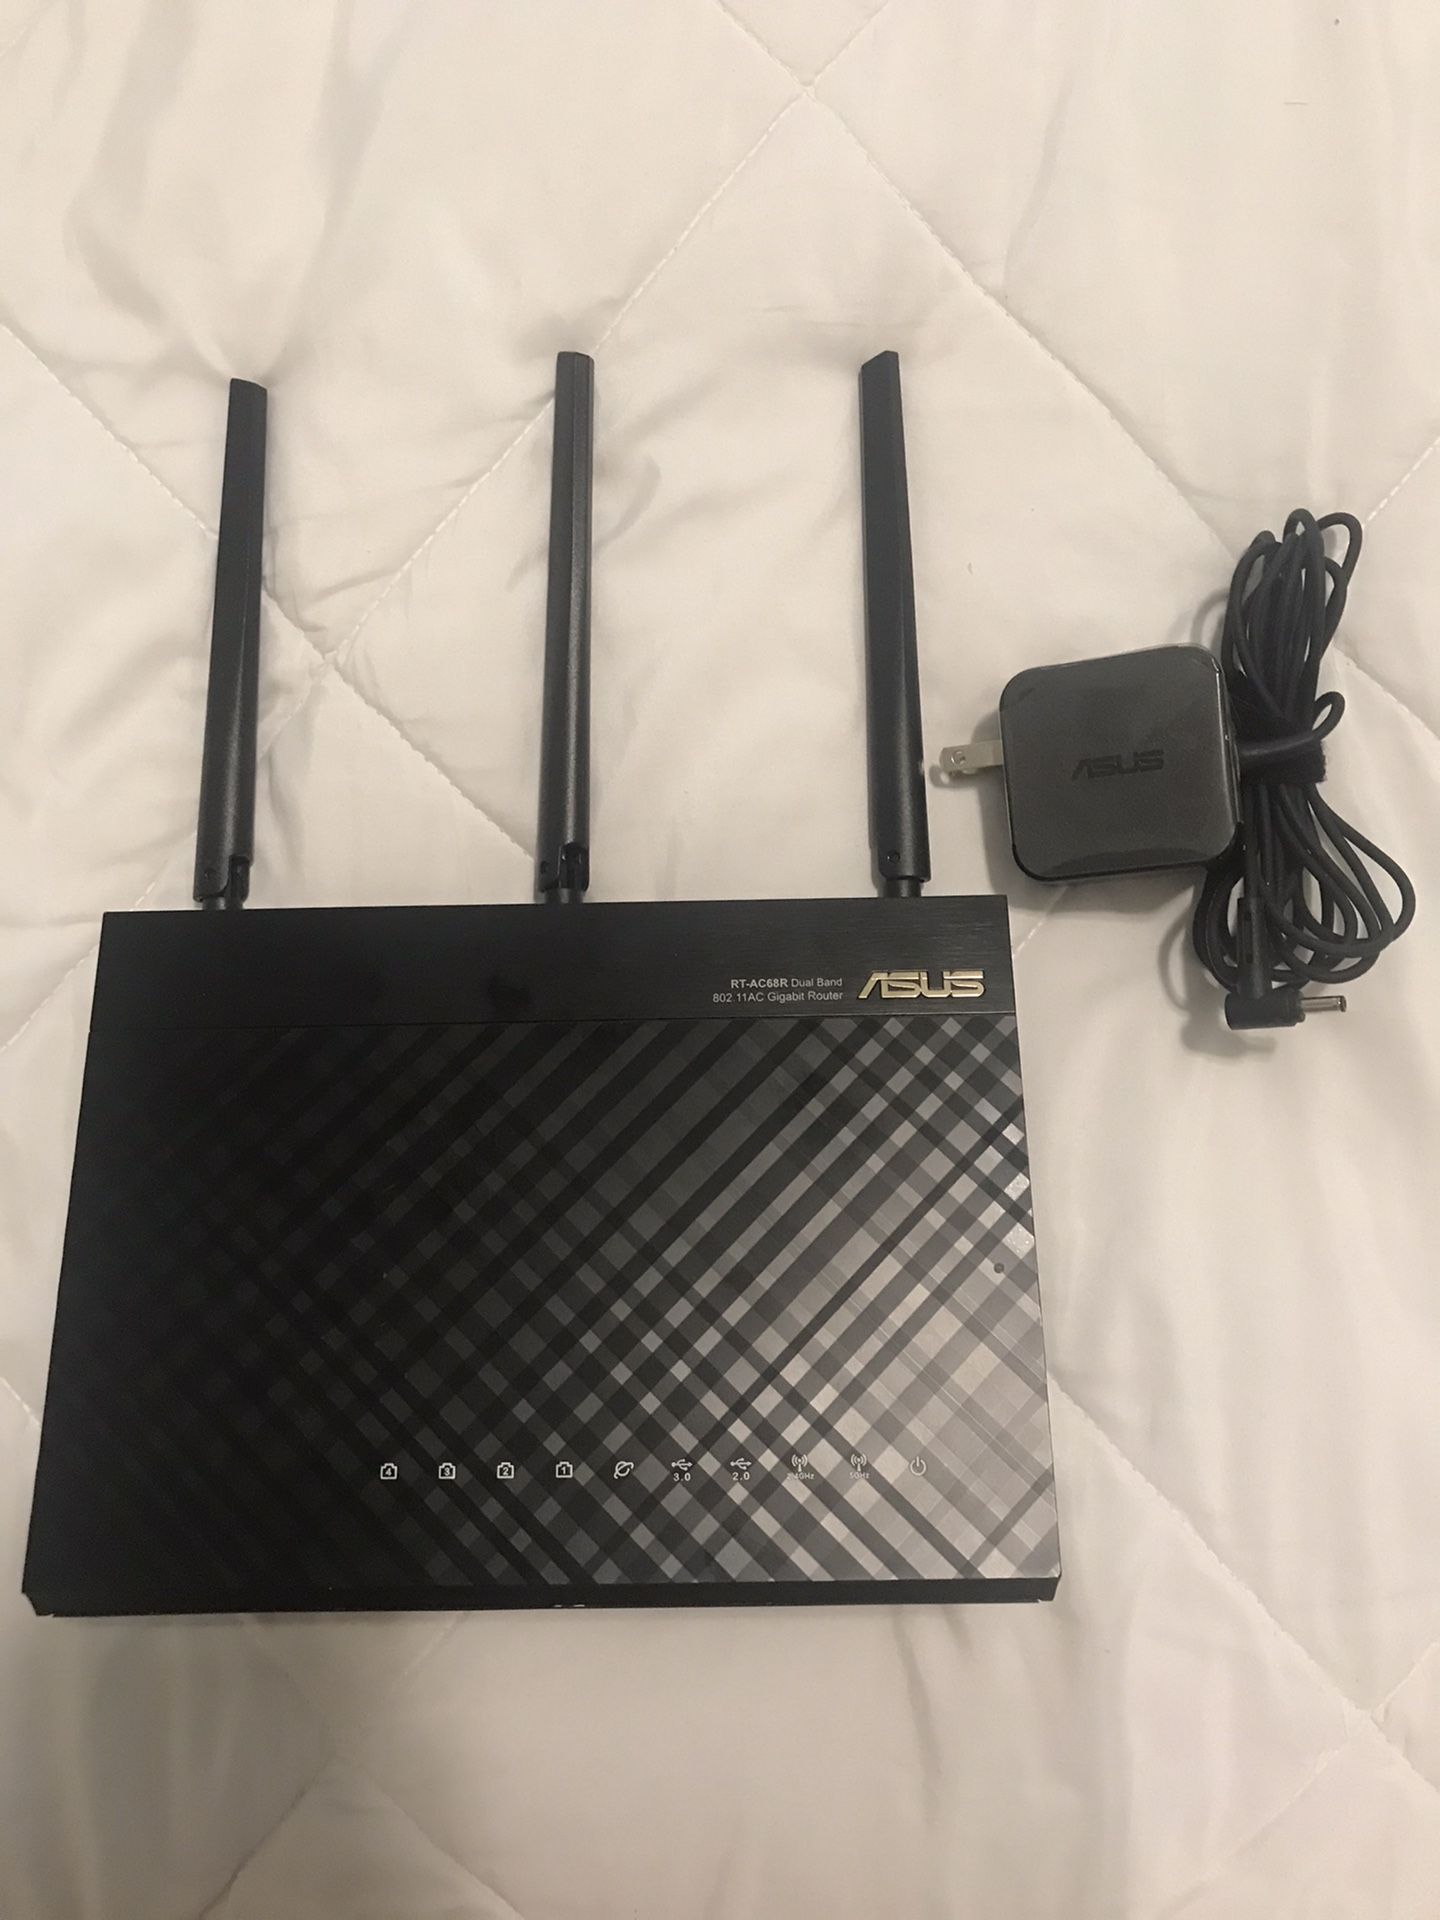 ASUS (RT-AC68R) Wireless-AC1900 dual band gigabit router